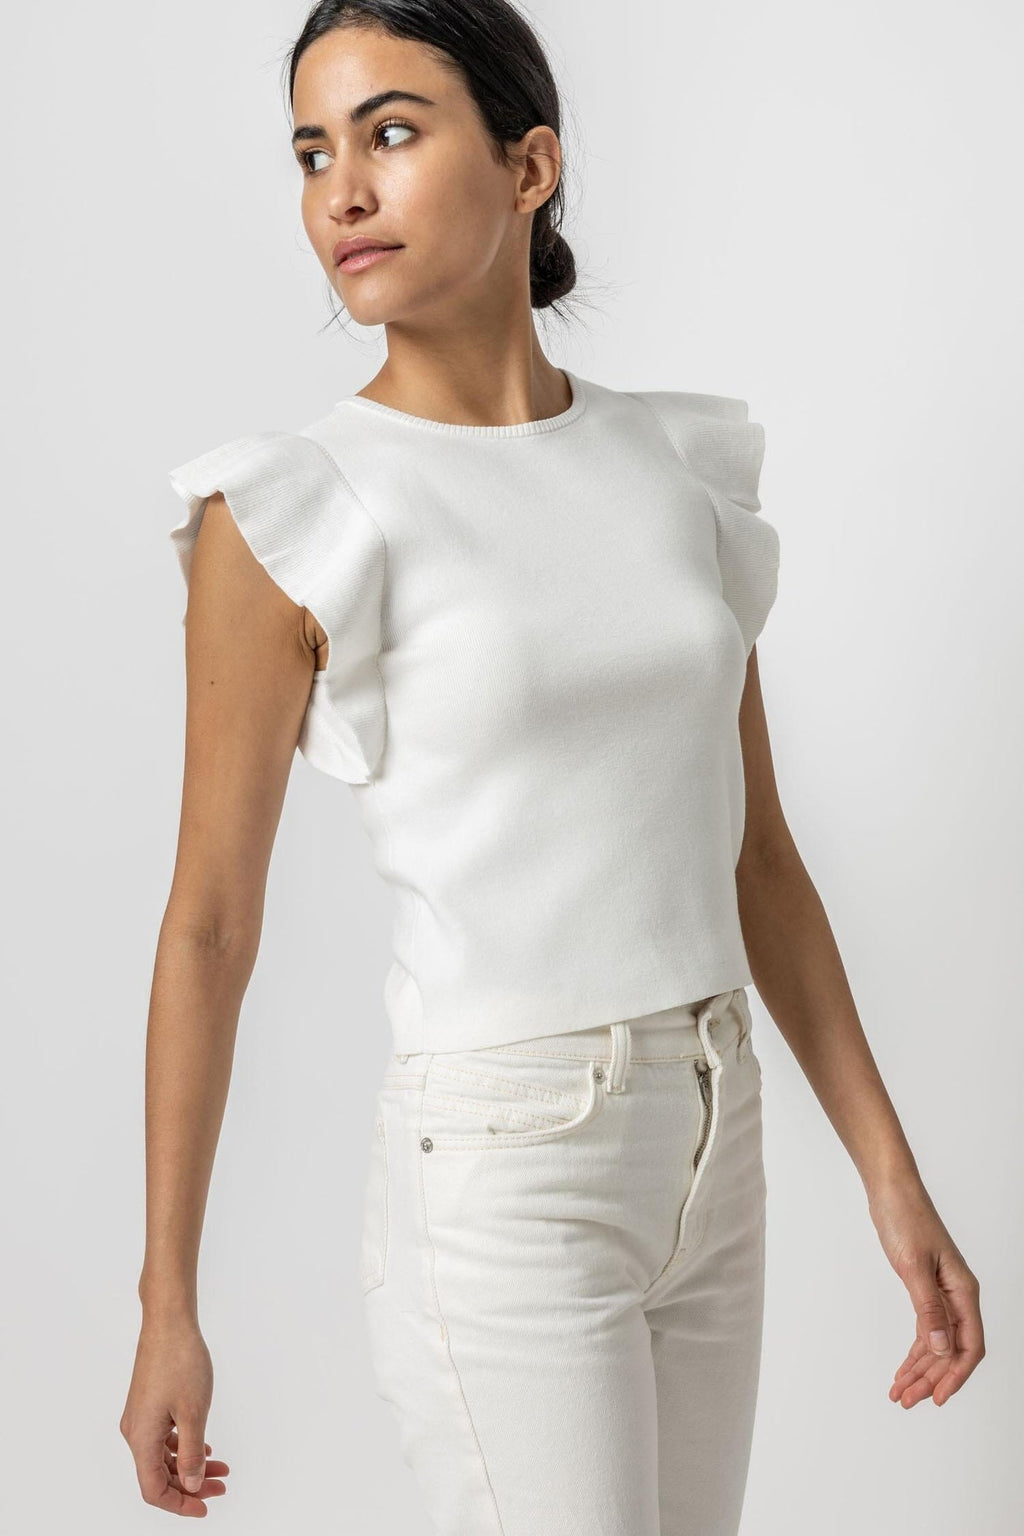 Lilla P Flutter Sleeve Shell Sweater in White